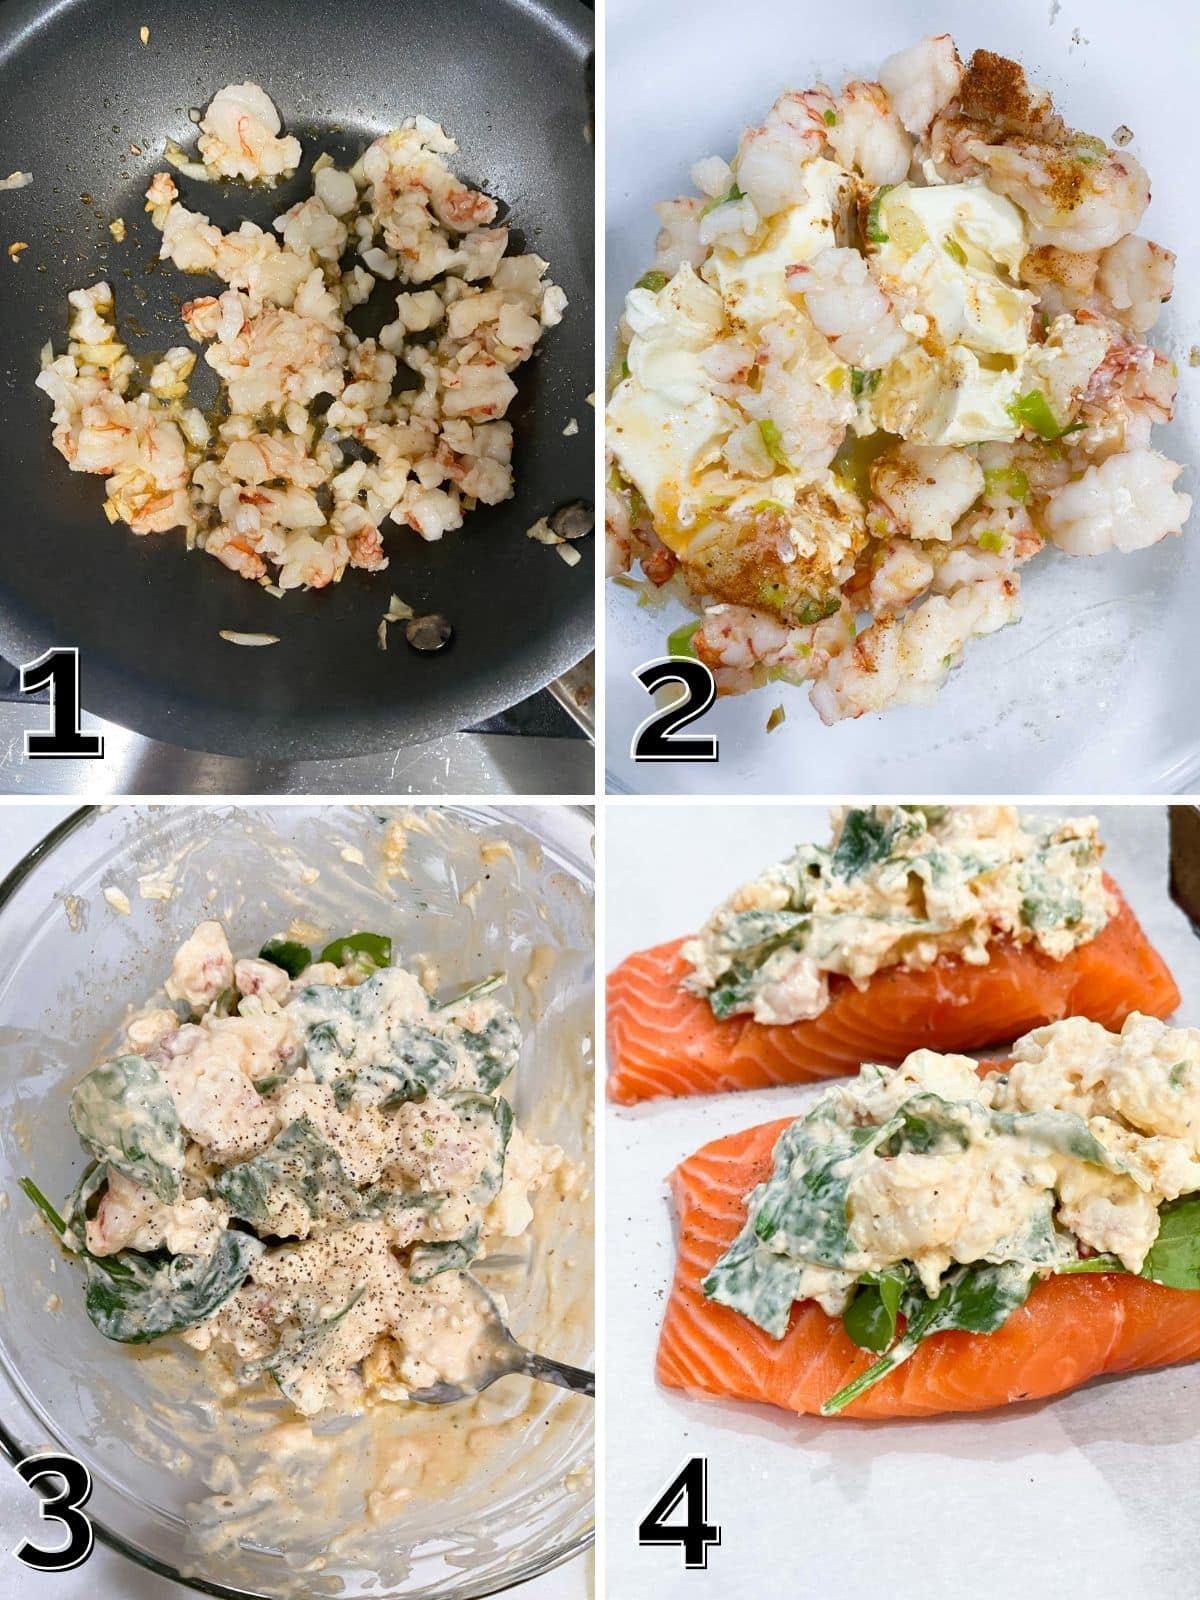 A step by step process for cooking shrimp, mixing with cream cheese and spinach, and stuffing into salmon filets to bake.